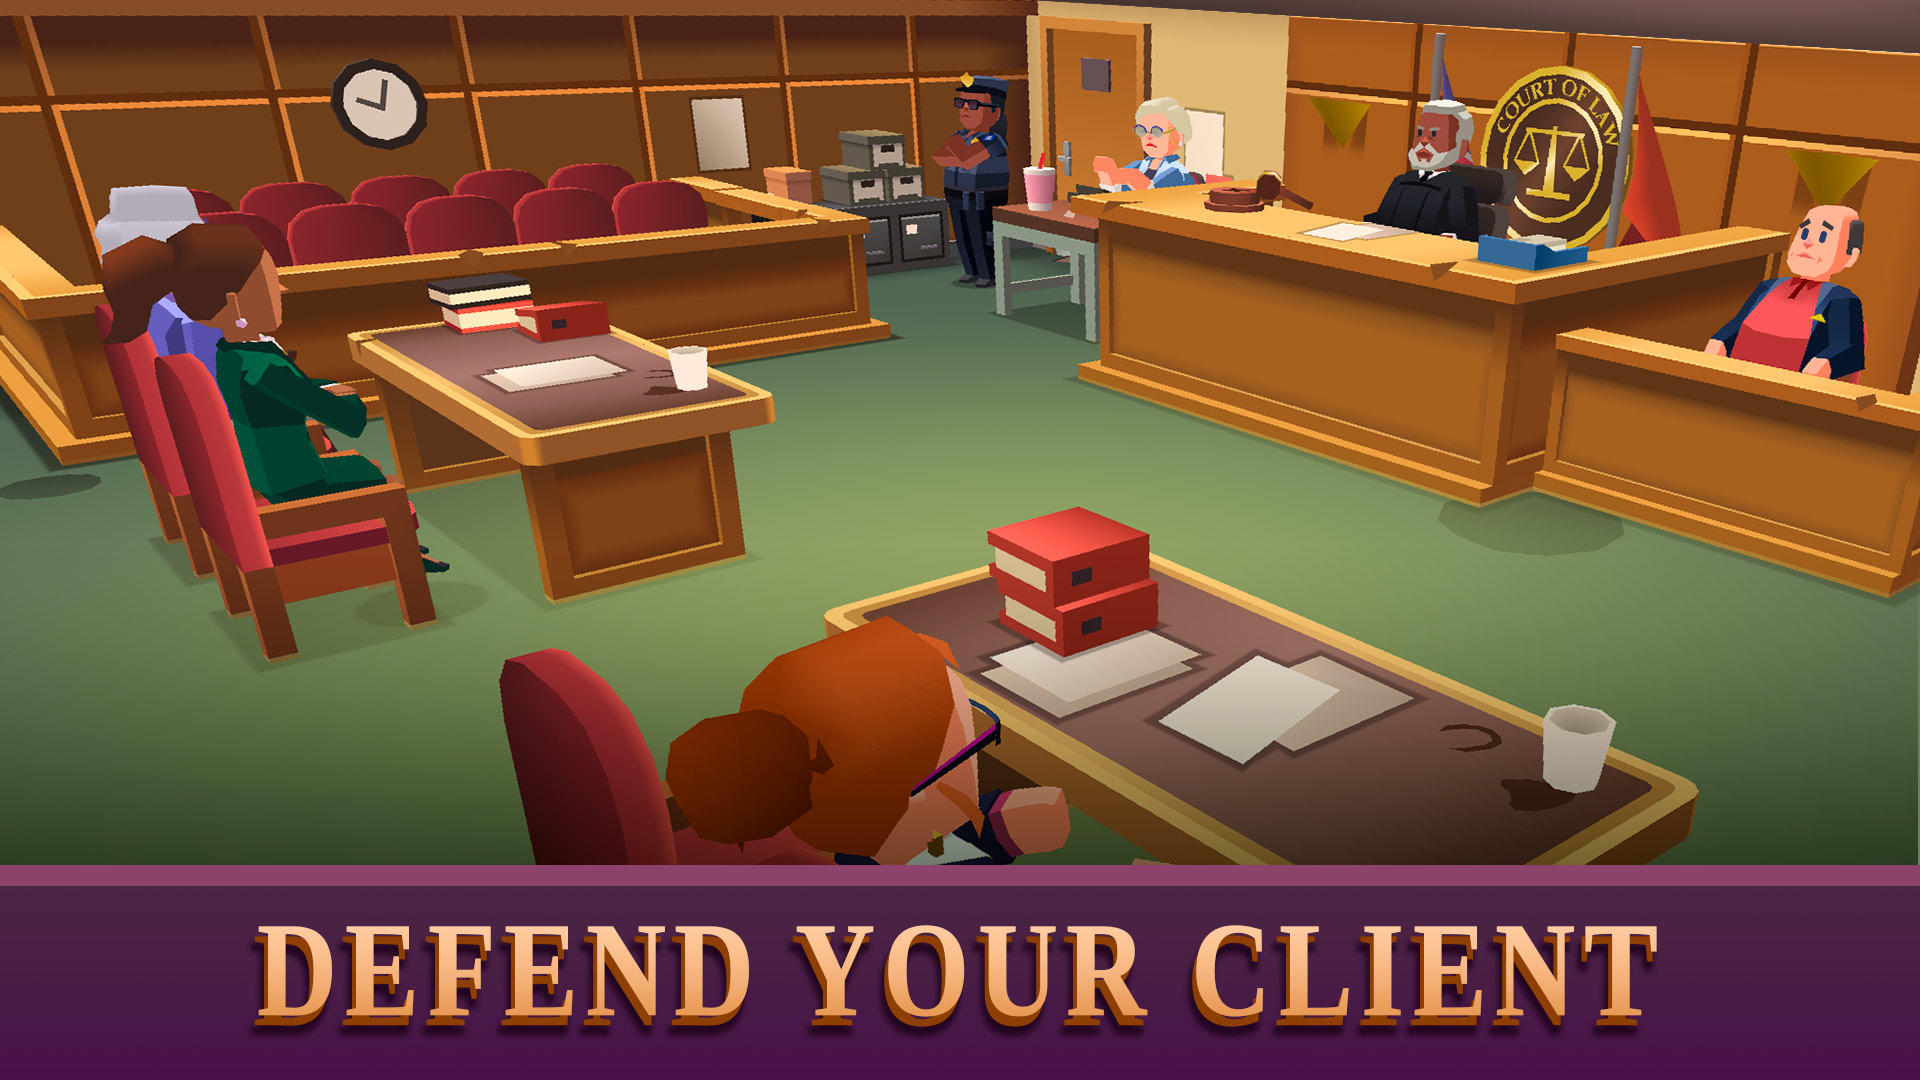 Screenshot 1 of Law Empire Tycoon - Idle Game 2.4.2